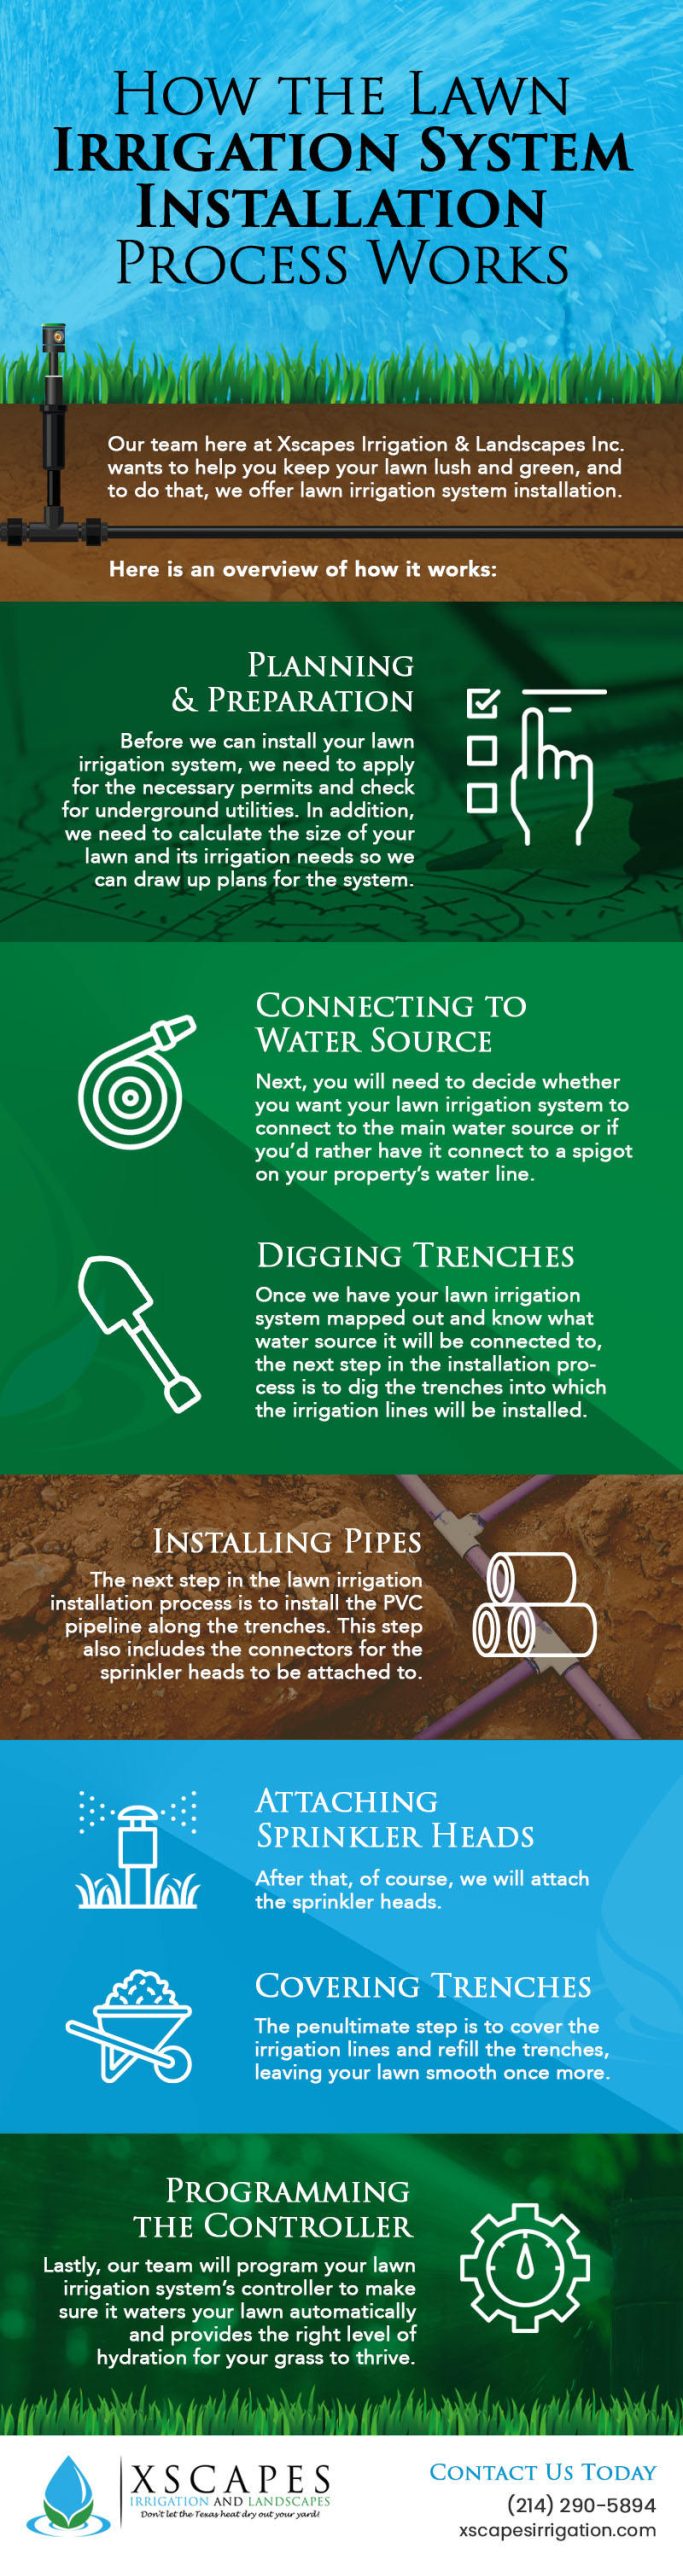 How the Lawn Irrigation System Installation Process Works [infographic]